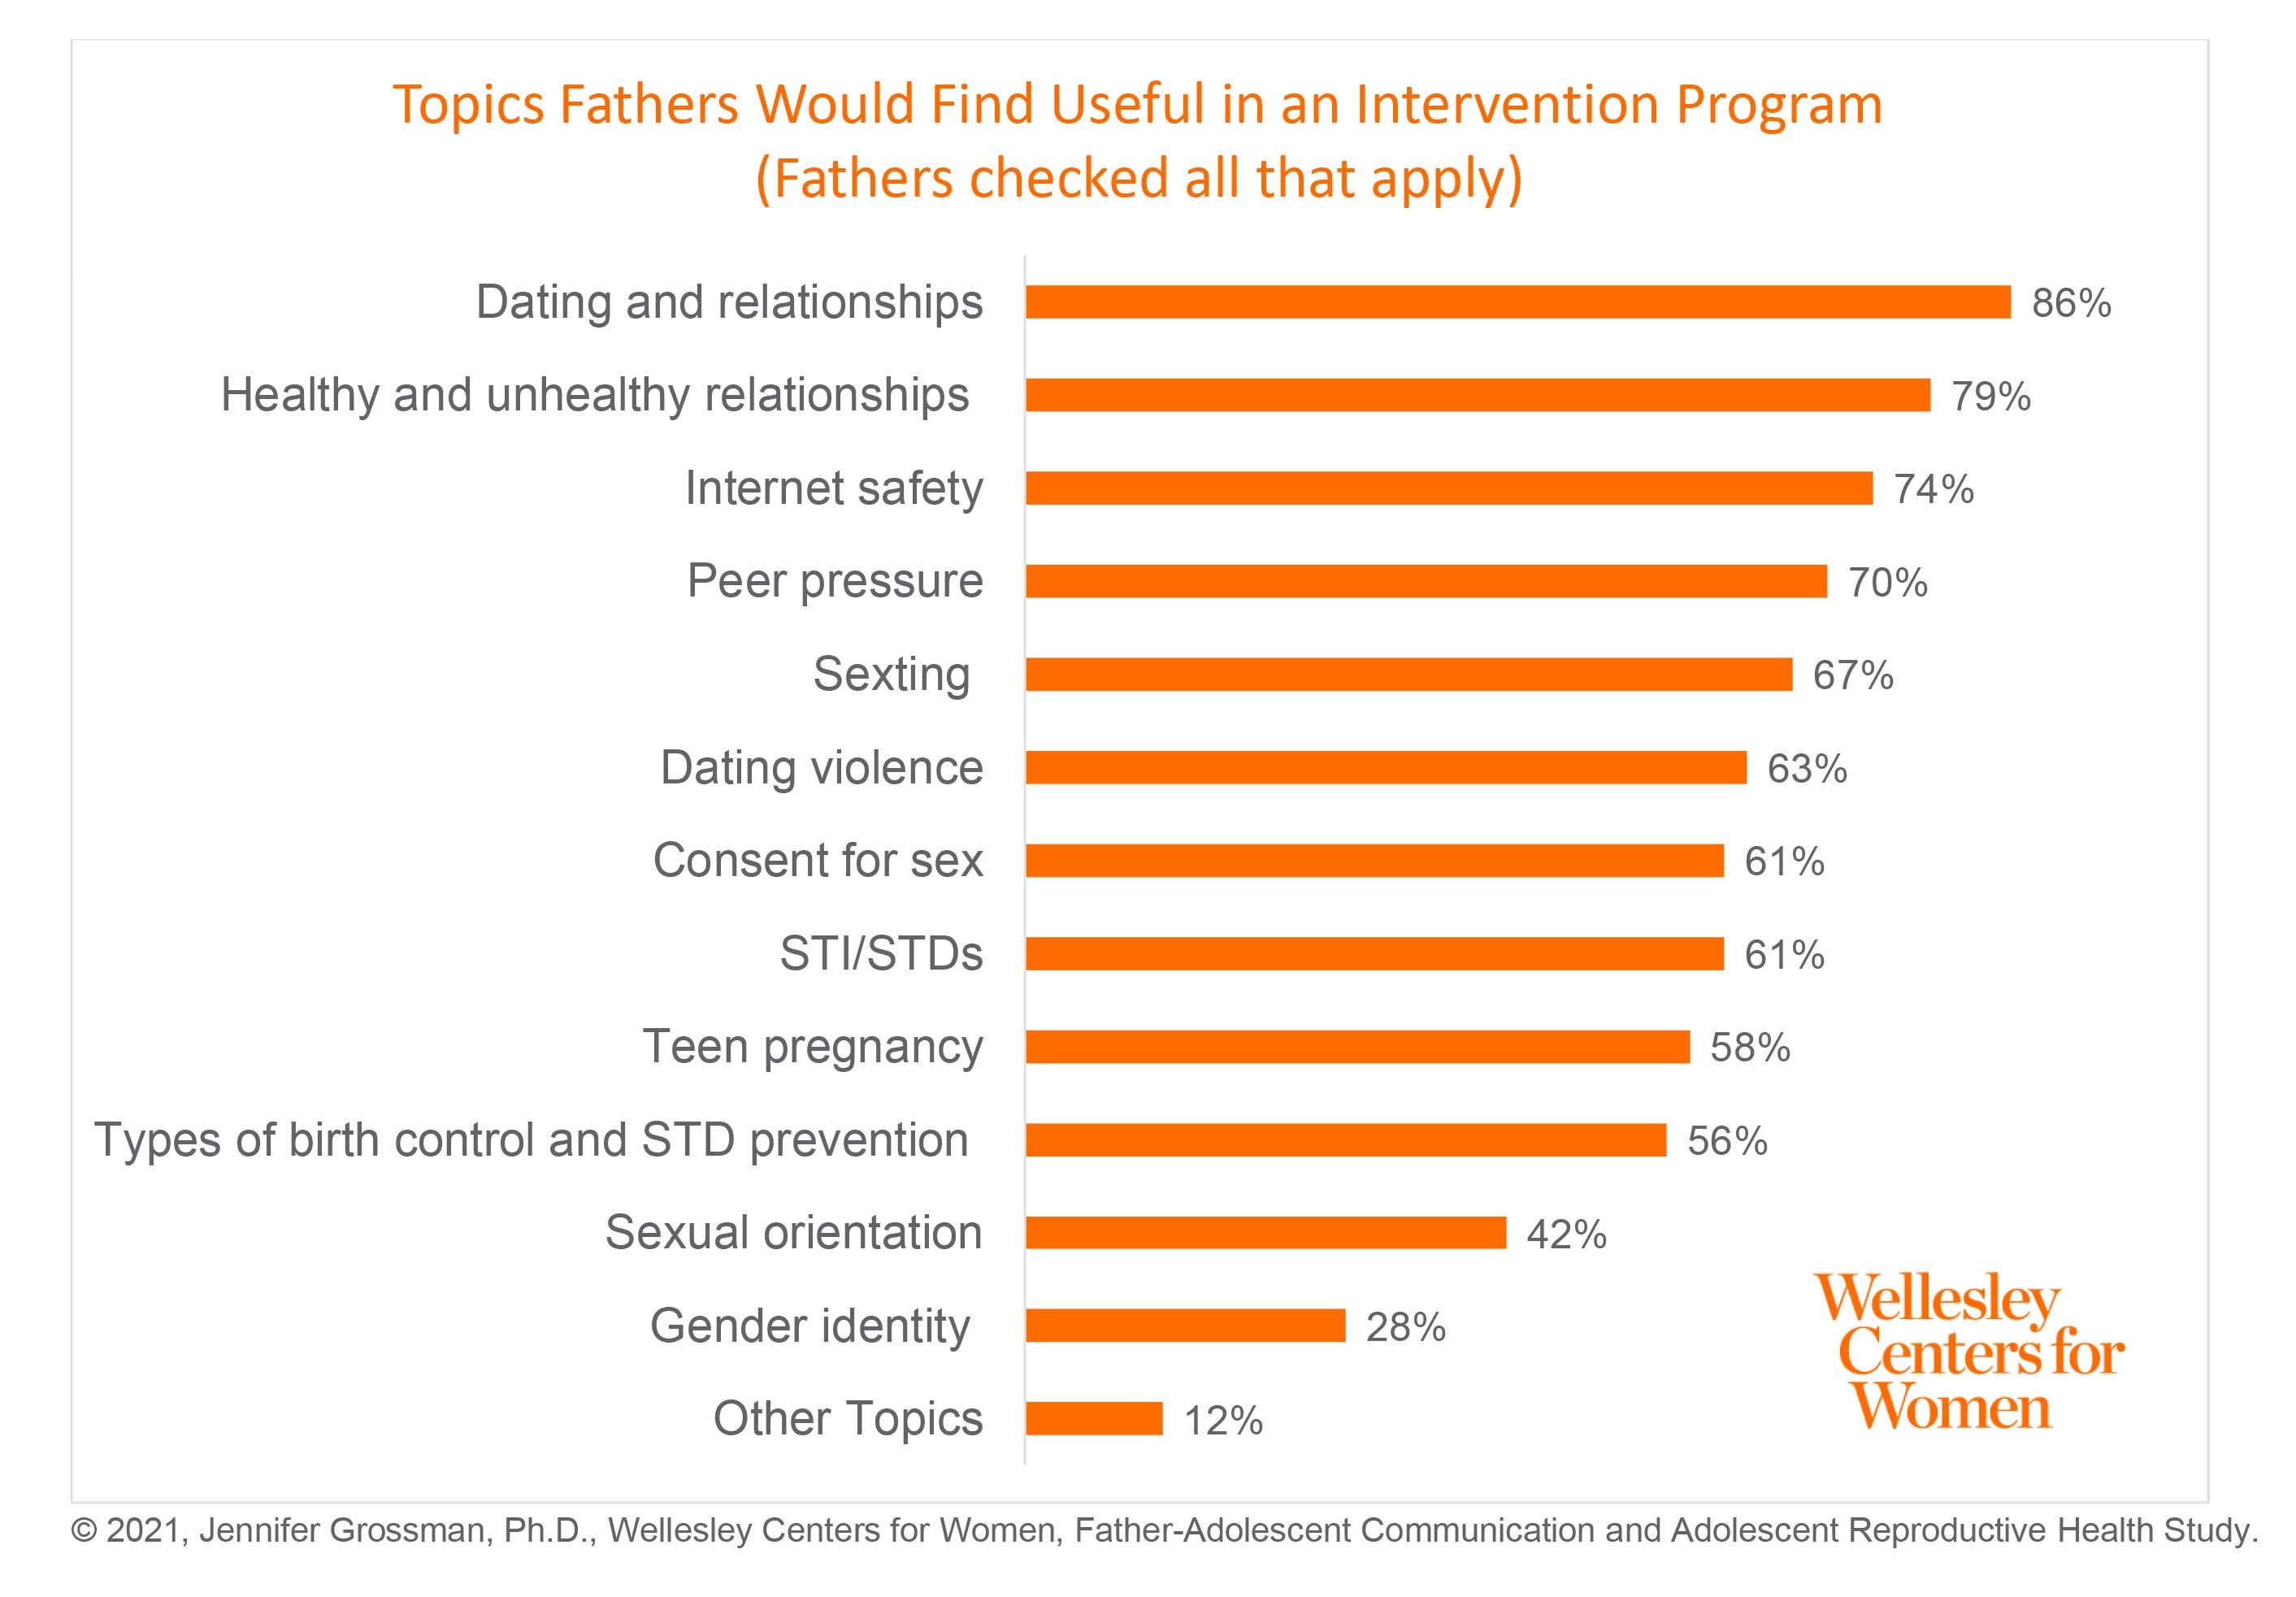 Topics that fathers would like a sex education program to include, based on research findings from Jennifer Grossman, Ph.D., et al.